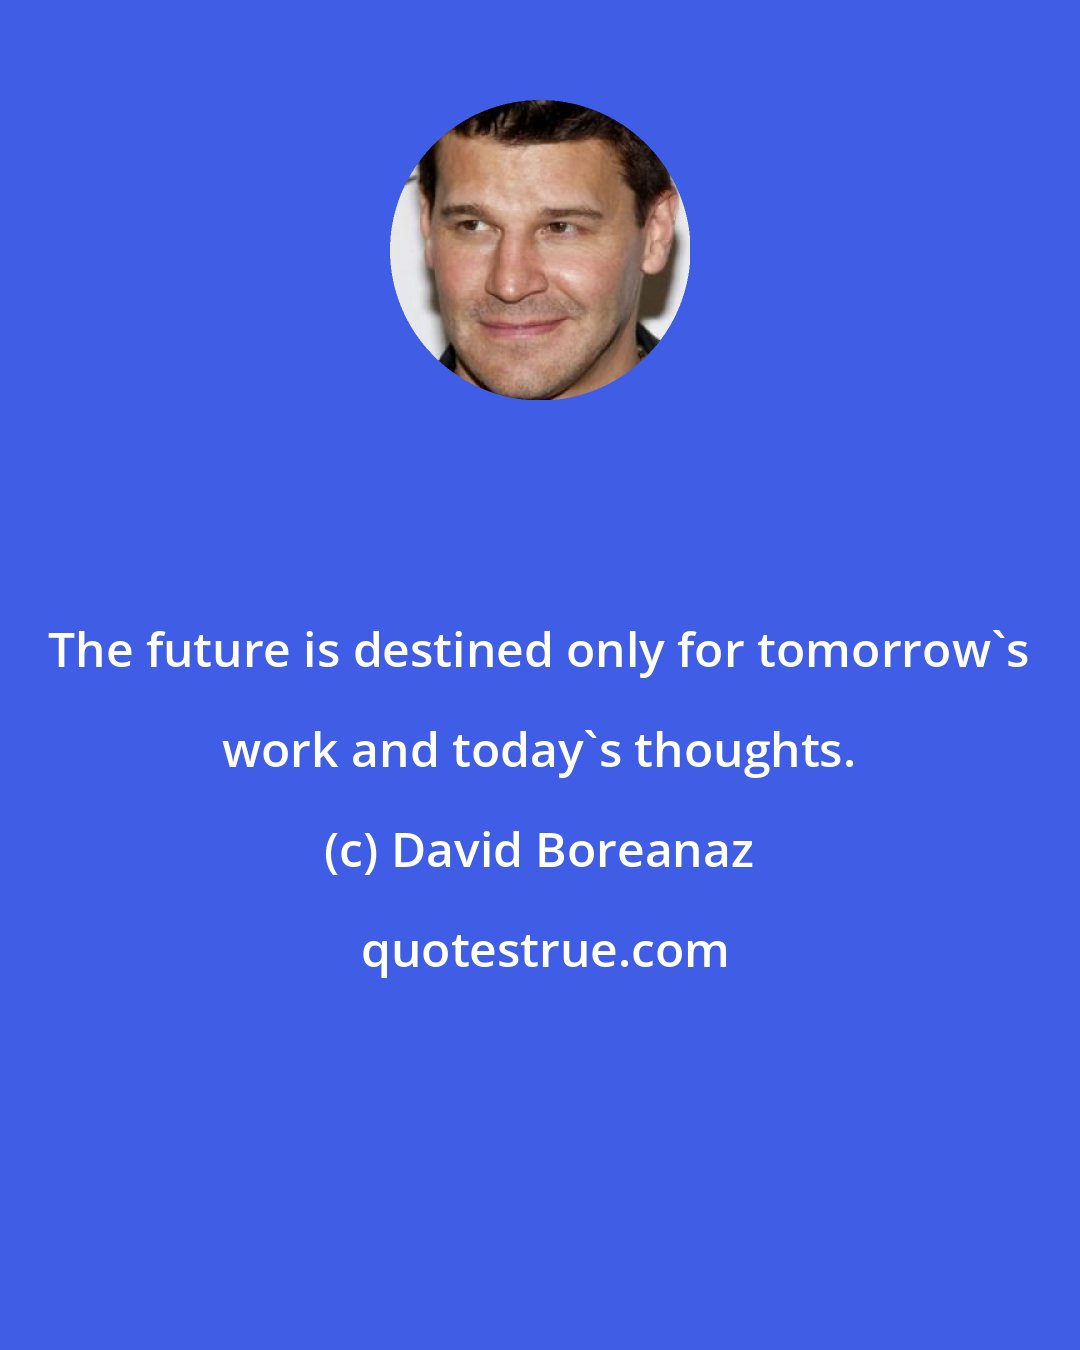 David Boreanaz: The future is destined only for tomorrow's work and today's thoughts.